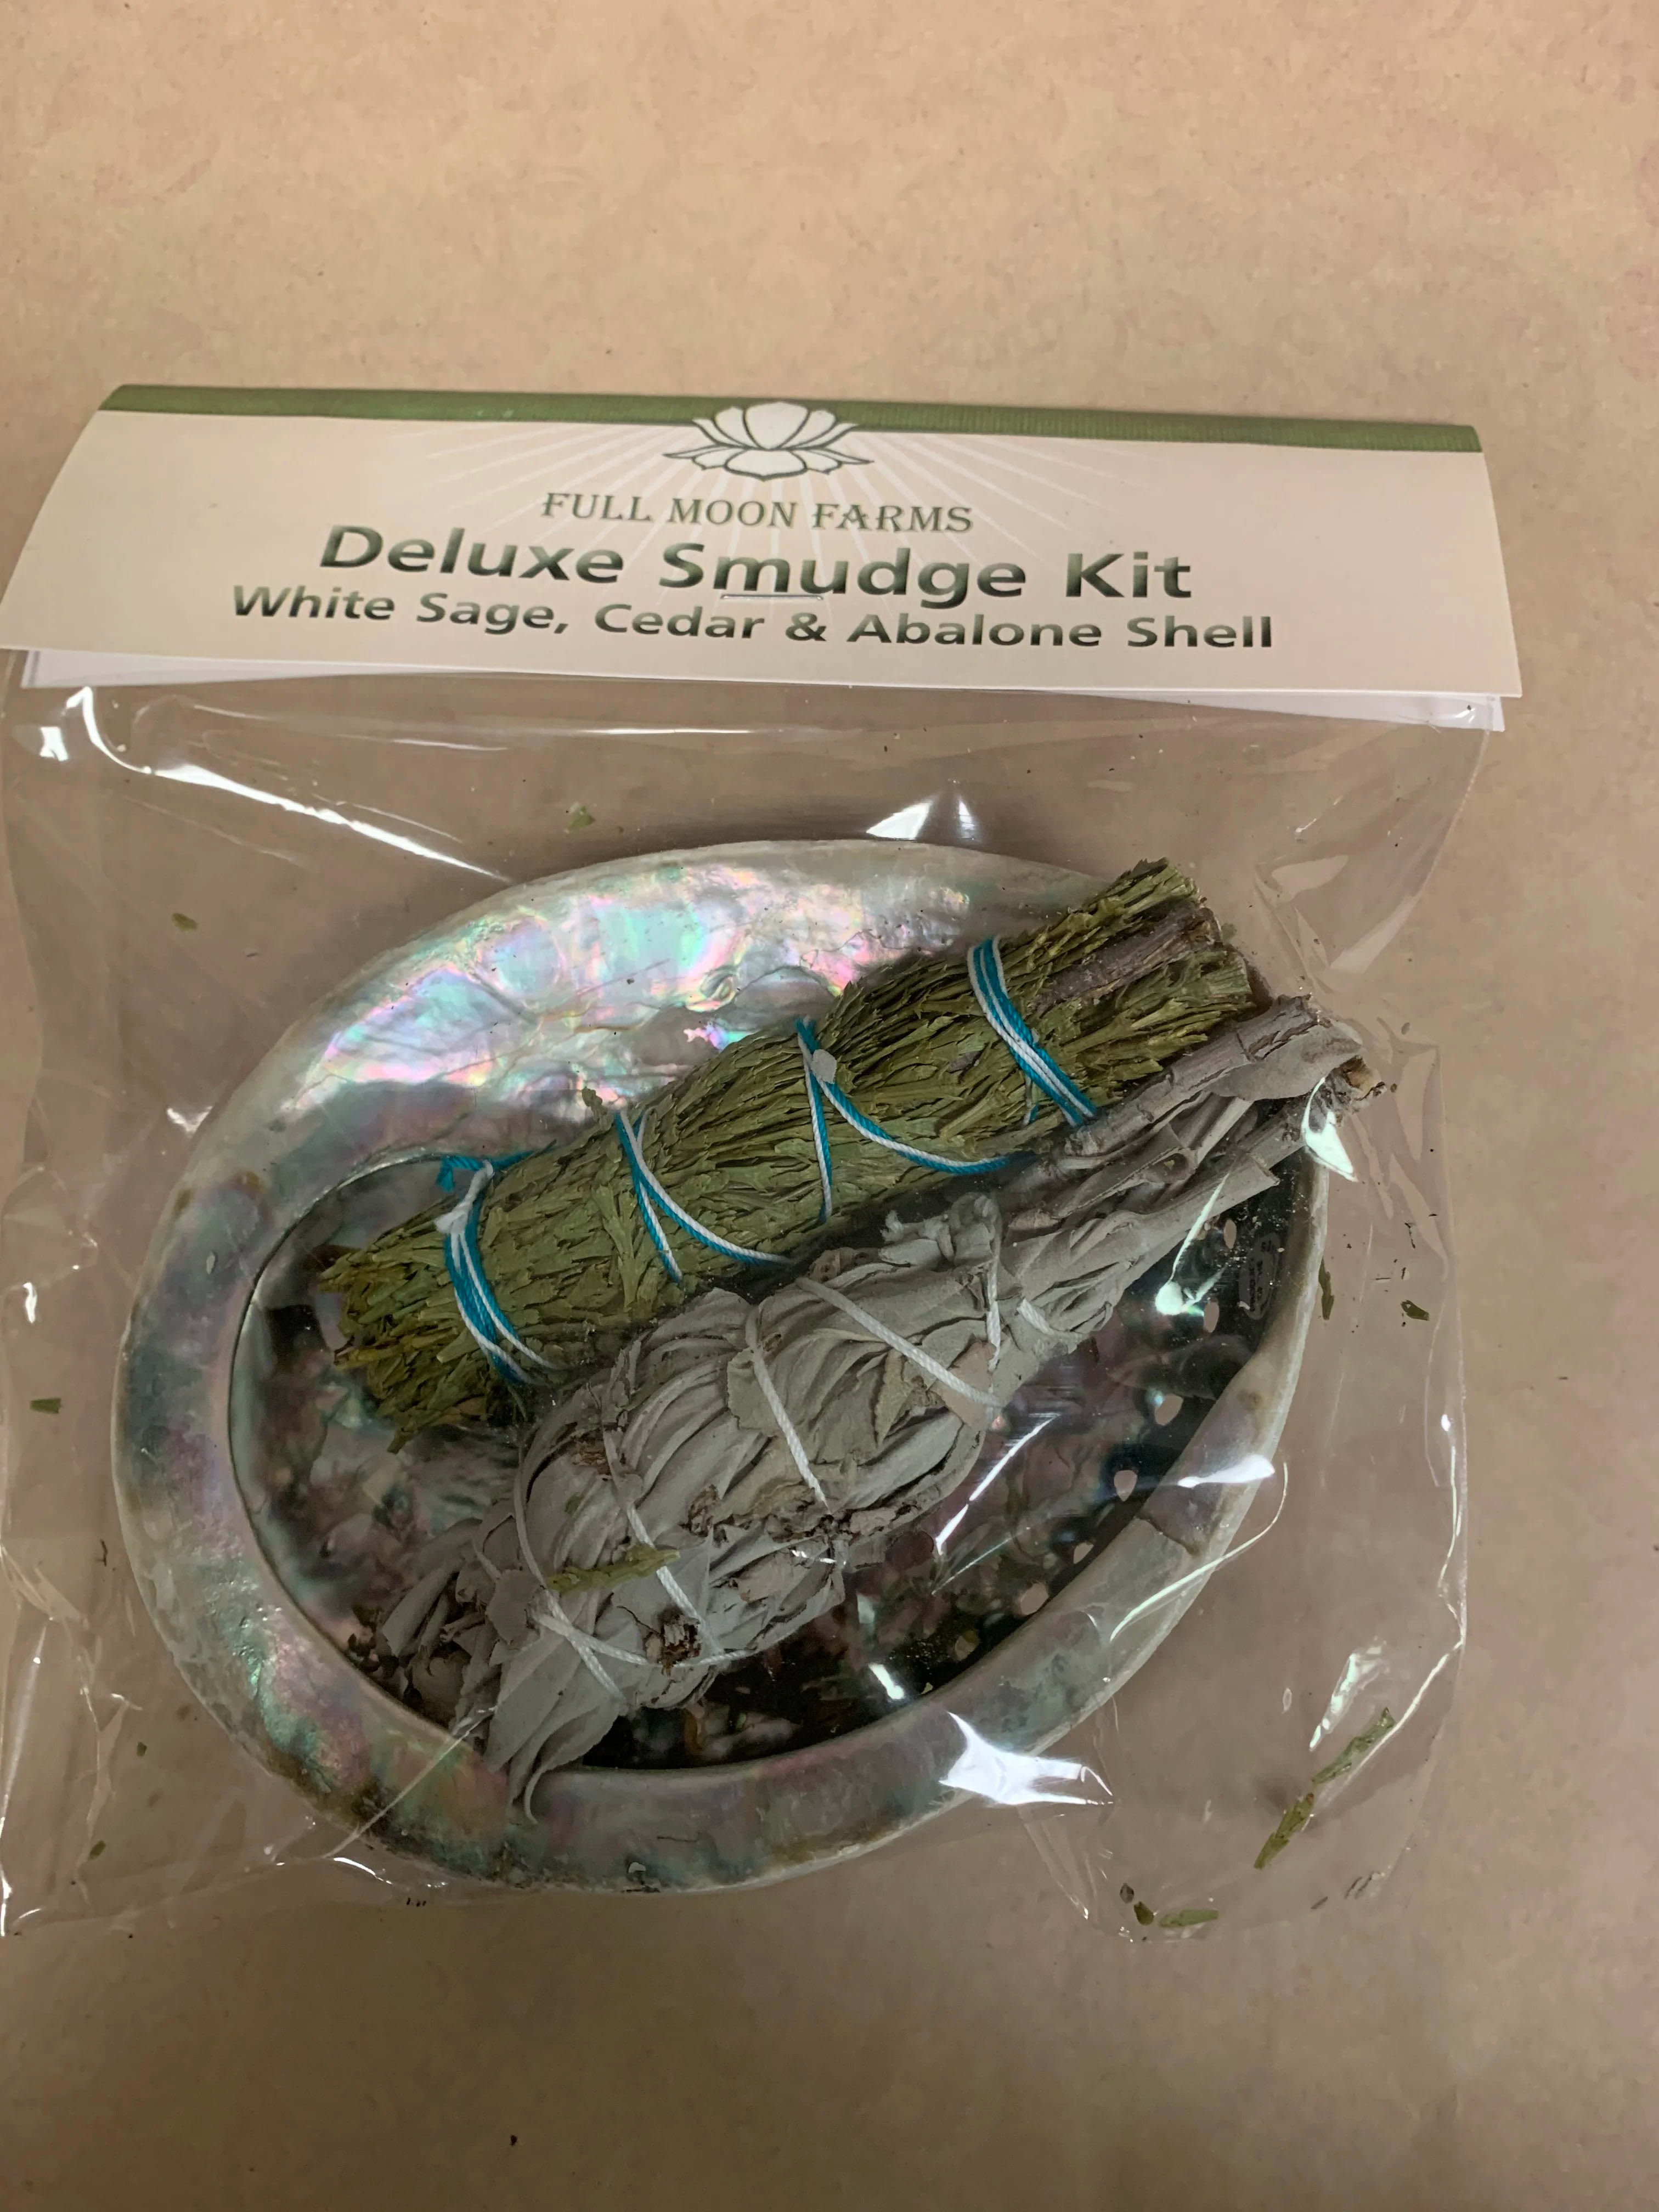 Full Moon Deluxe Smudge Kit - White sage, Cedar &amp; Abalone shell This wonderful Smudge Kit has all you need for your sacred ceremony. Cedar to cleanse a new space or reinforce the protection already in place. White Sage to cleanse and purify your space. The sacred abalone shell to use in your smudging ceremony.